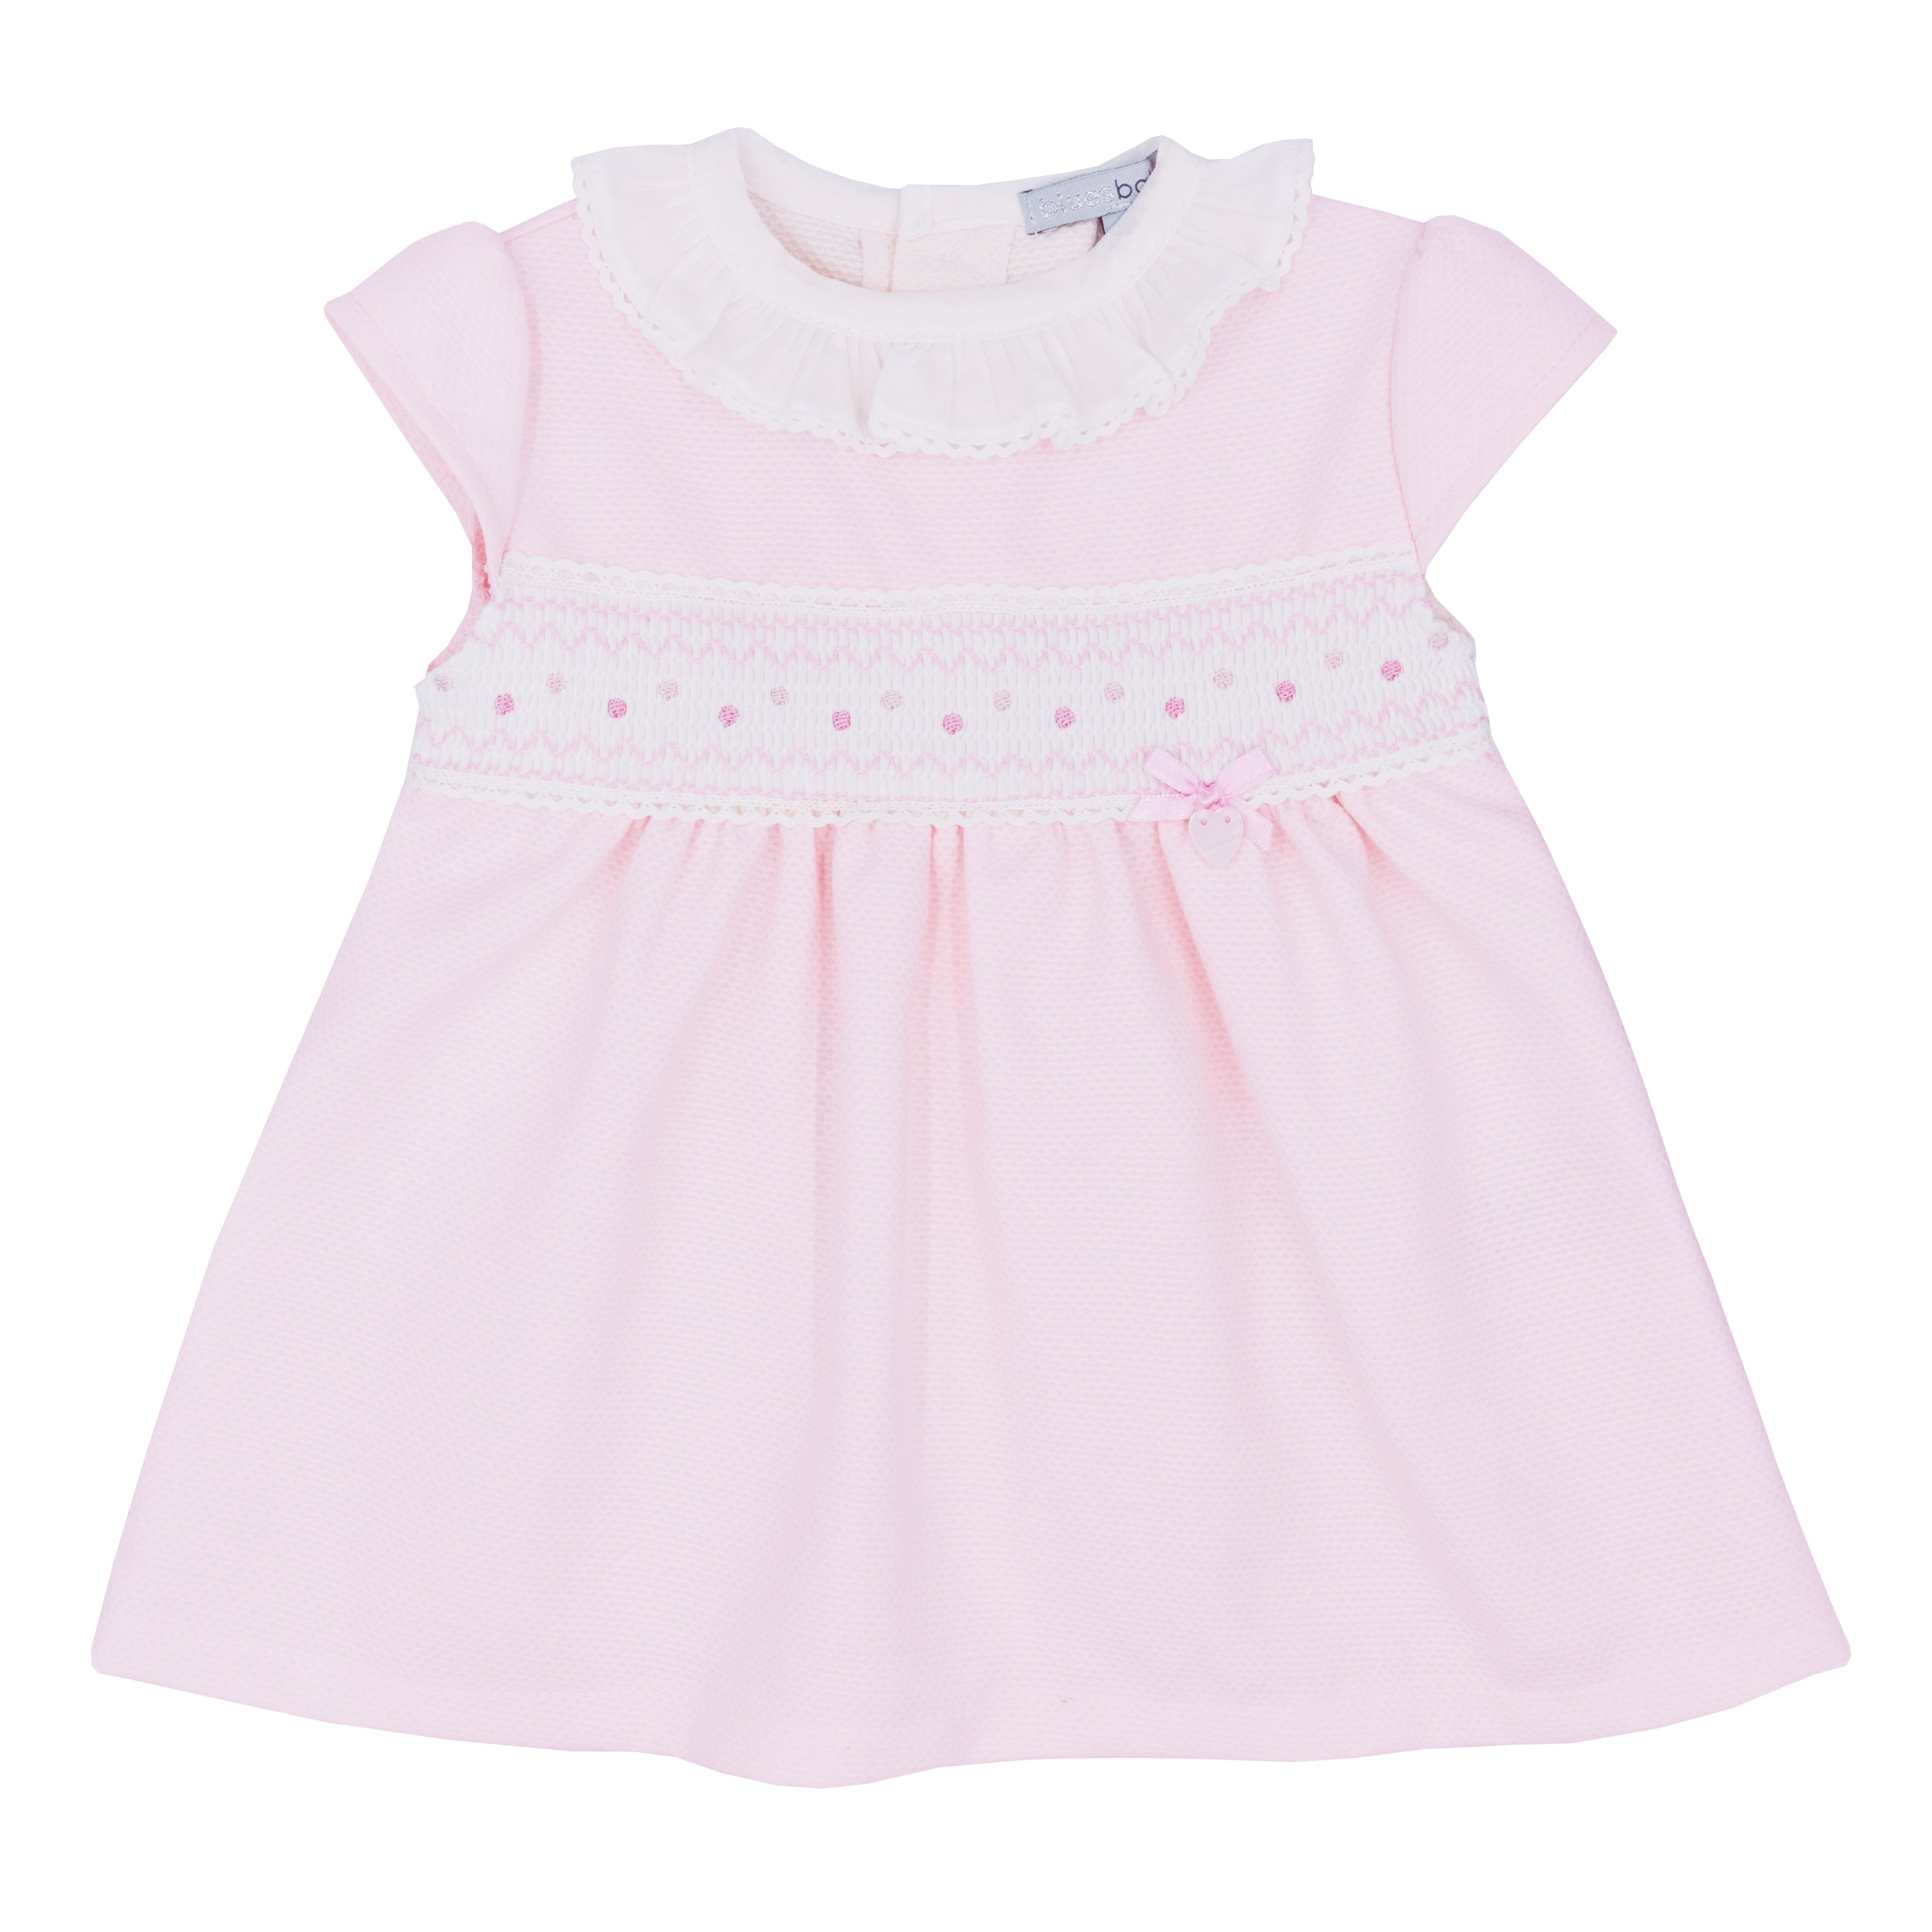 Girls smocked dress with frill collar